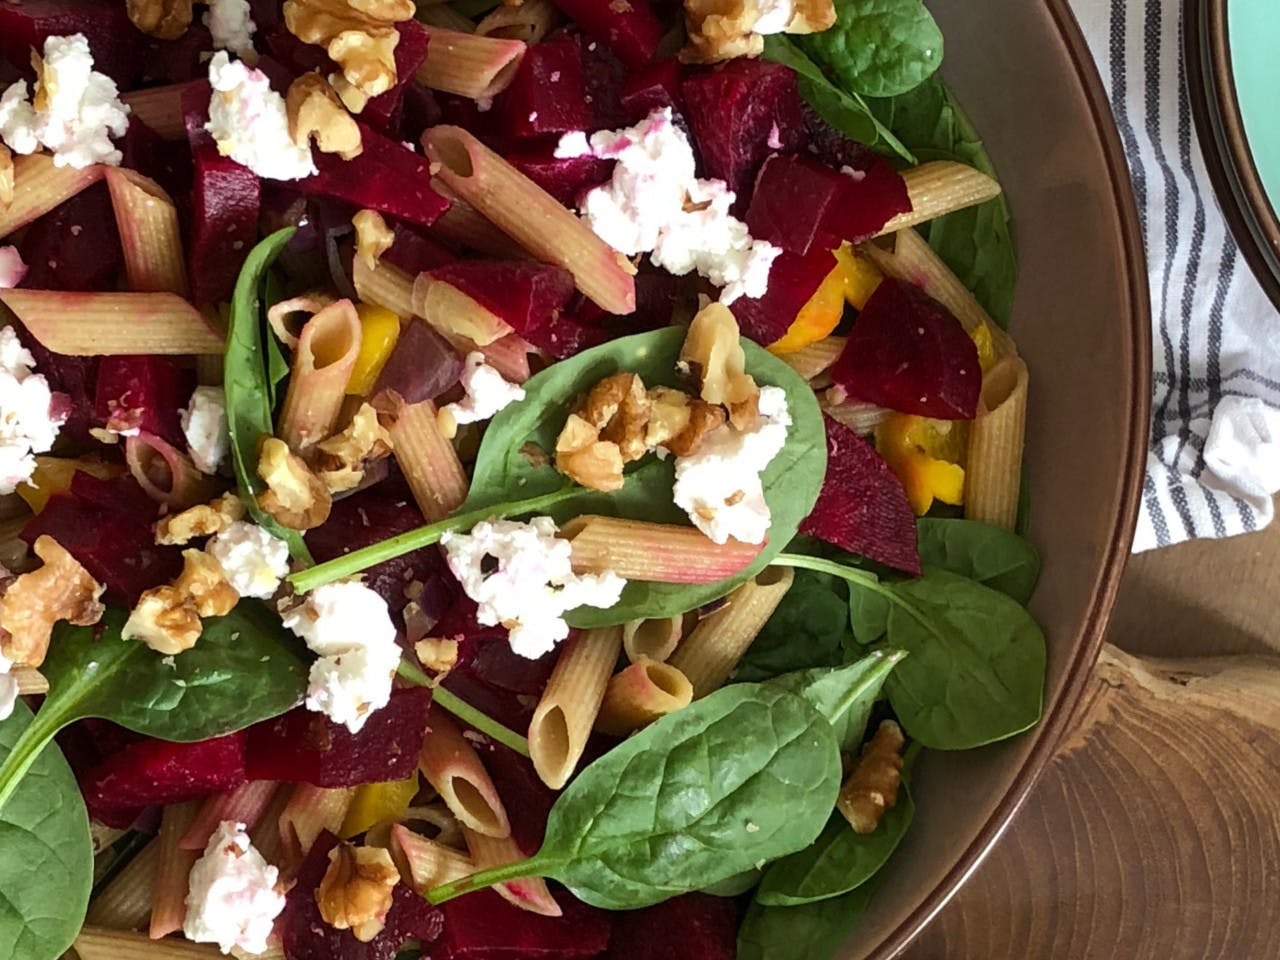 Summer pasta salad with beet and goat cheese